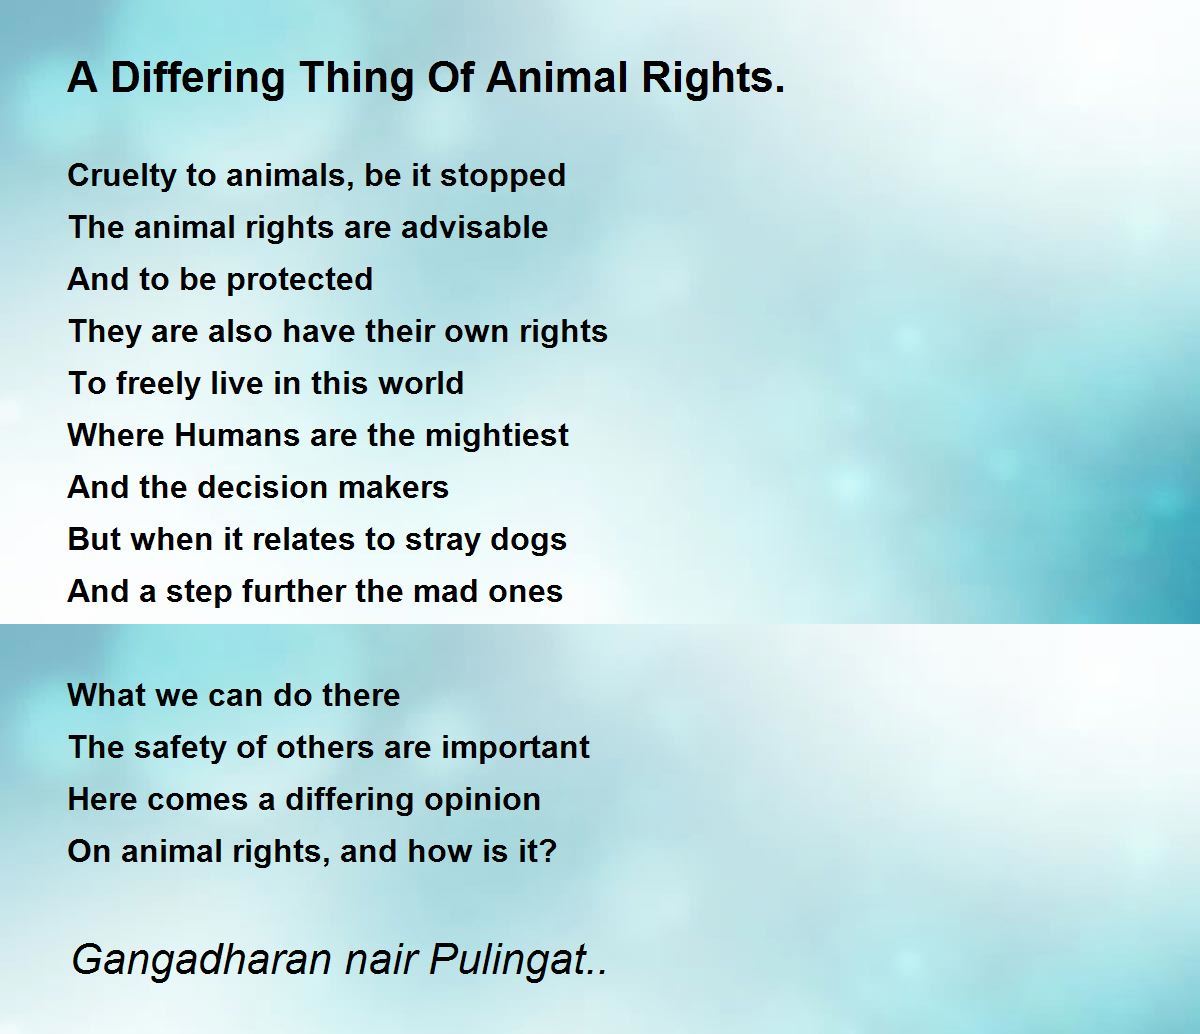 A Differing Thing Of Animal Rights. - A Differing Thing Of Animal Rights.  Poem by Gangadharan nair Pulingat..